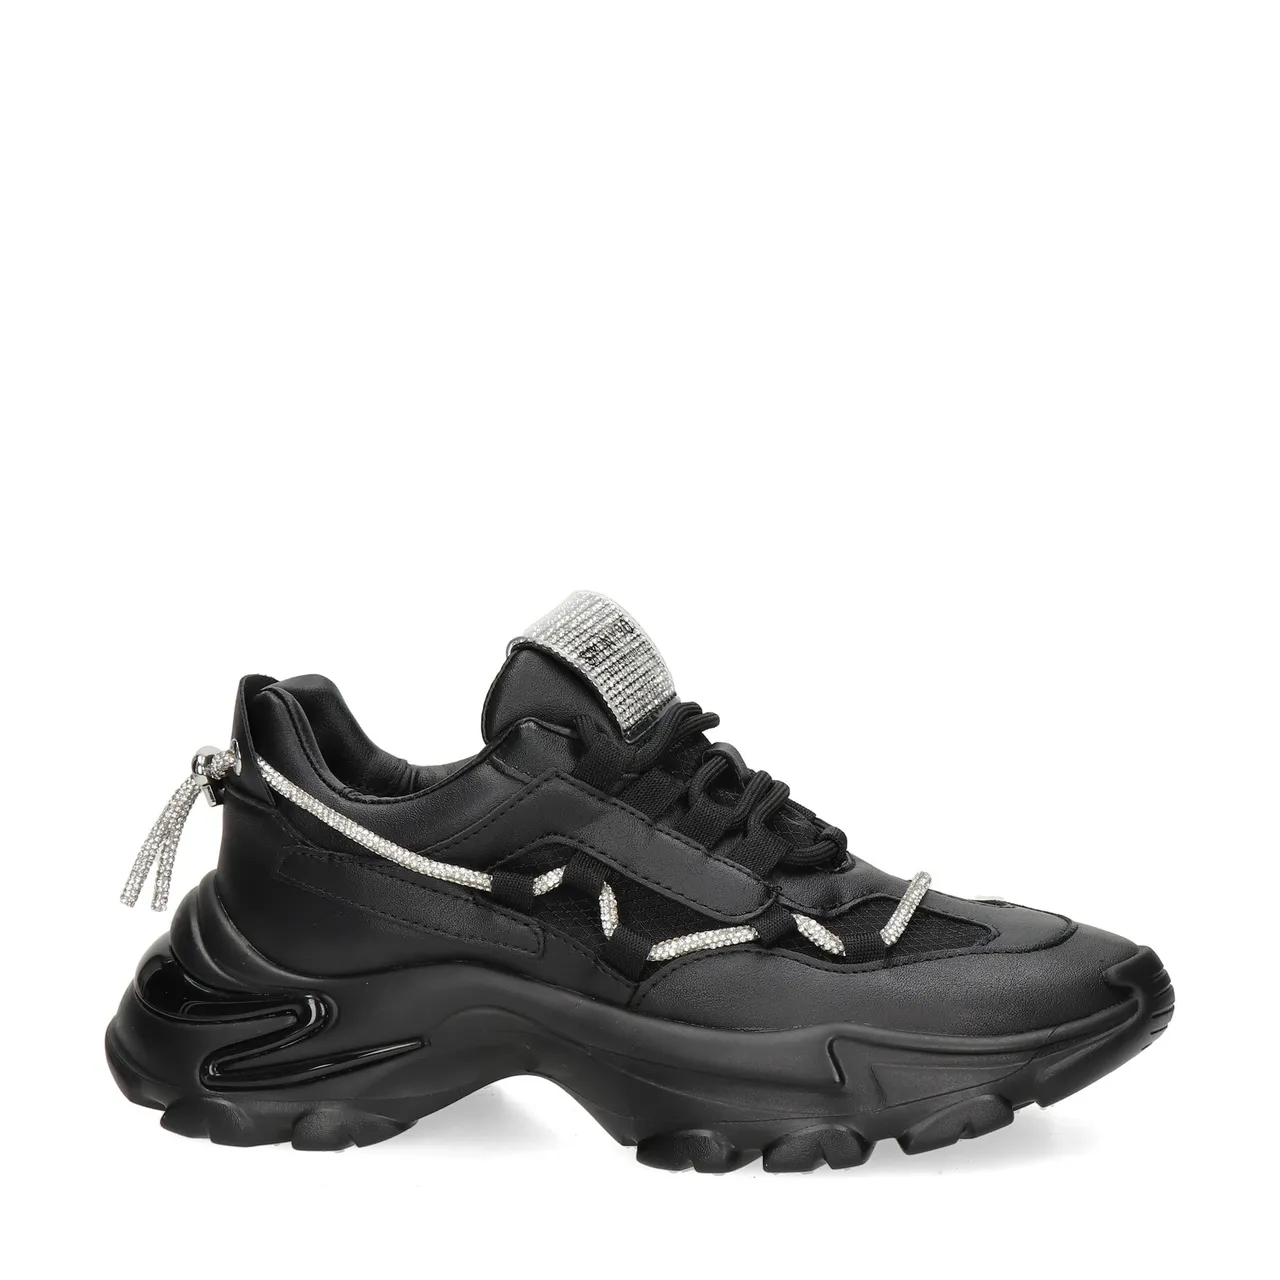 Steve Madden Miracles dad sneakers